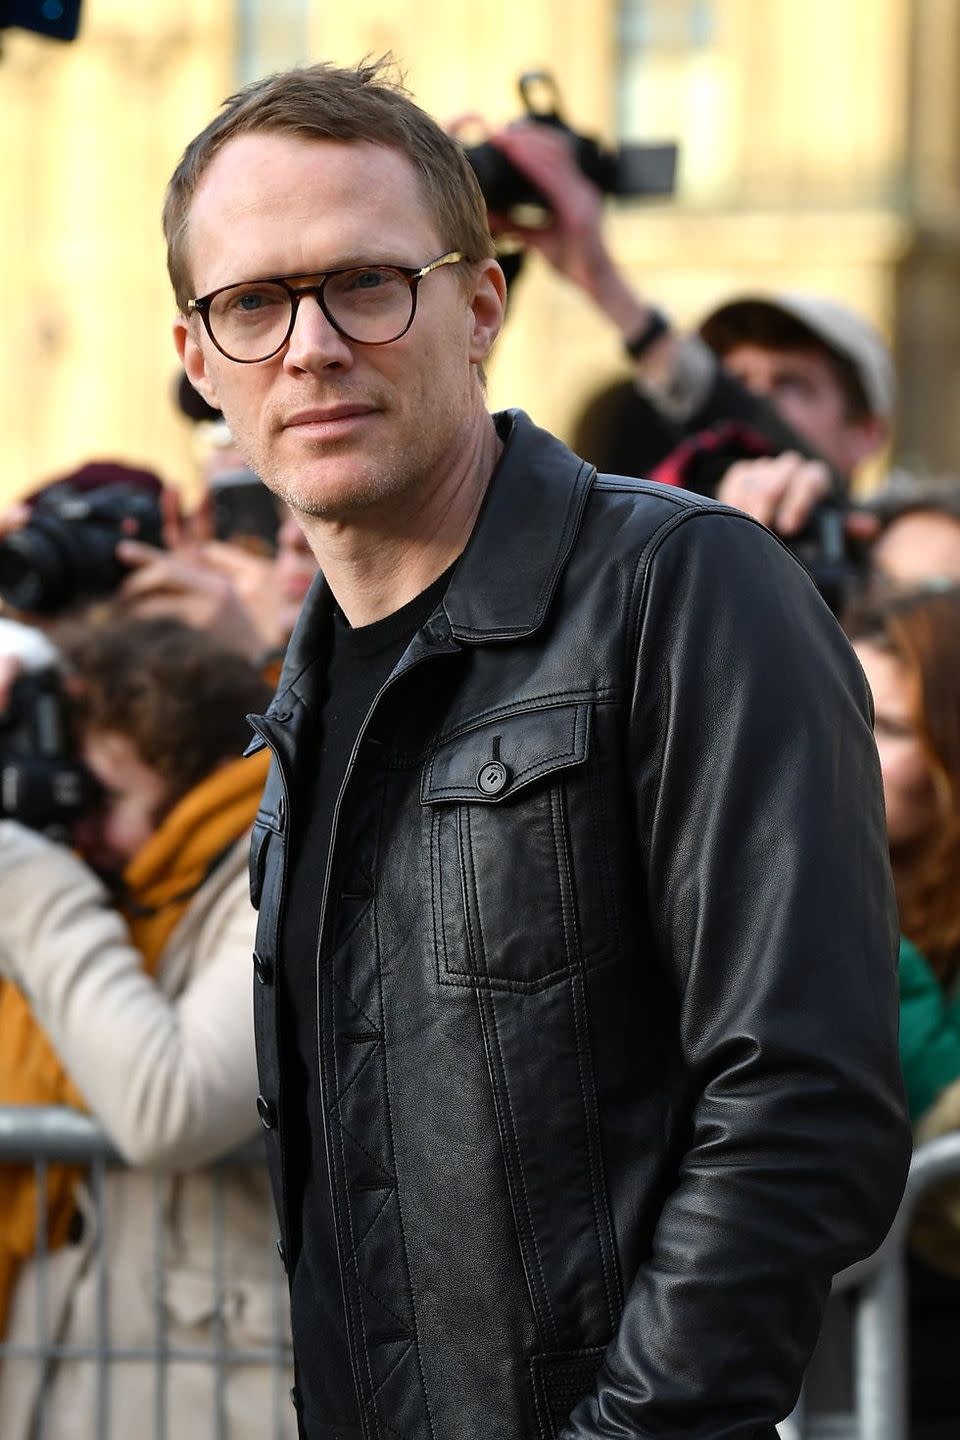 Paul Bettany was almost cast as Prince Philip for Seasons 3 and 4.